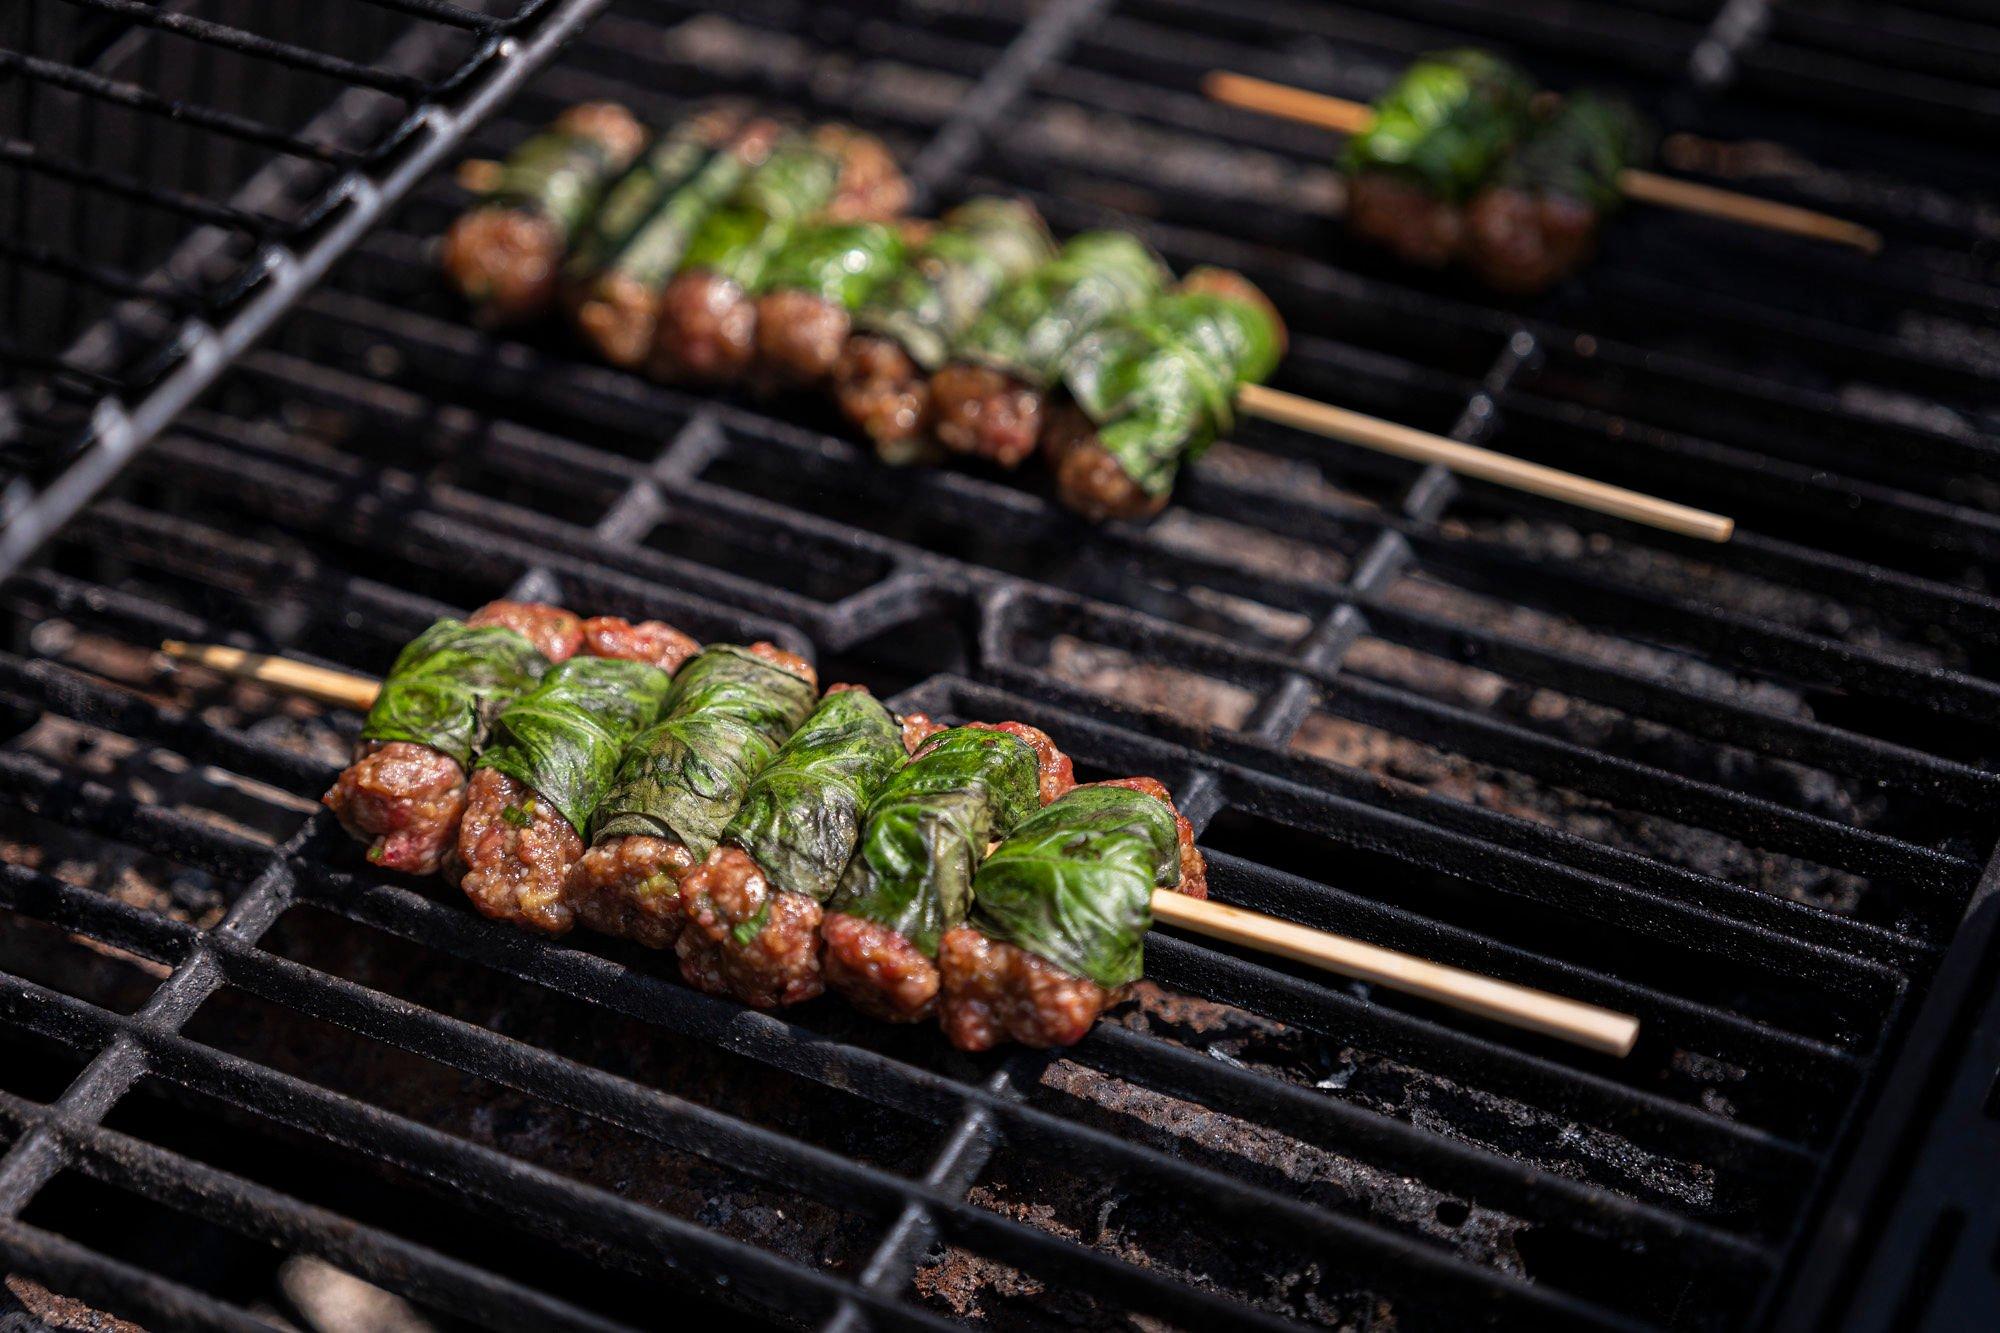 Grill the skewers until the meat is done to your liking. Image by Grit Media